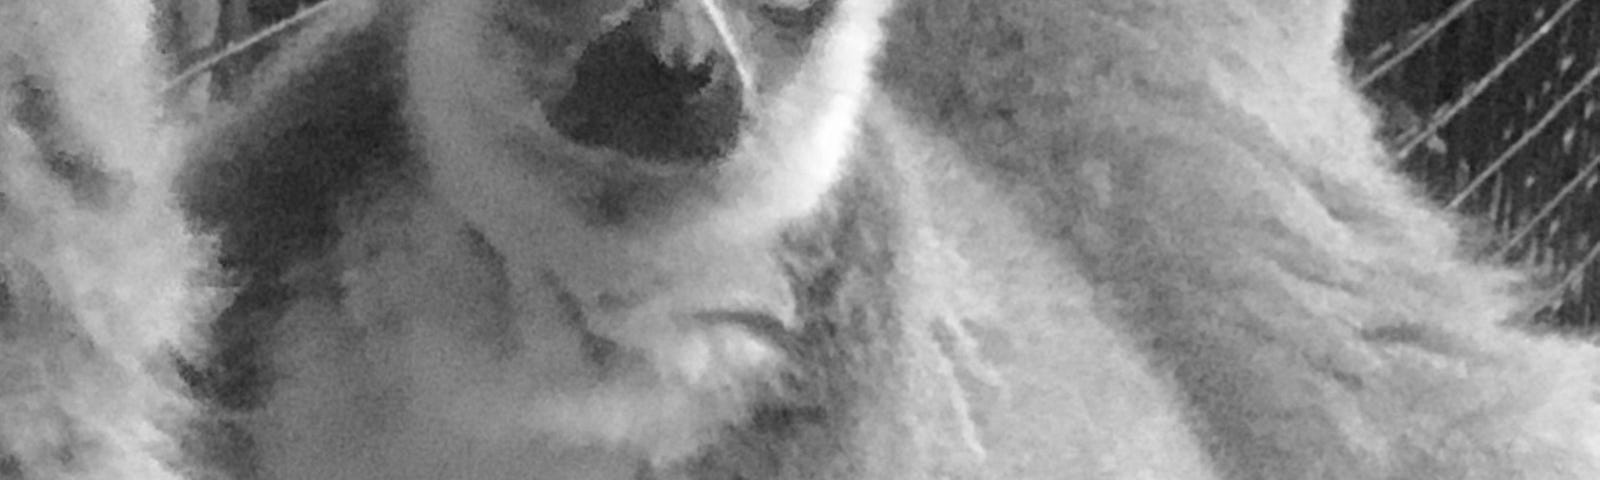 A ring-tailed lemur staring into the camera